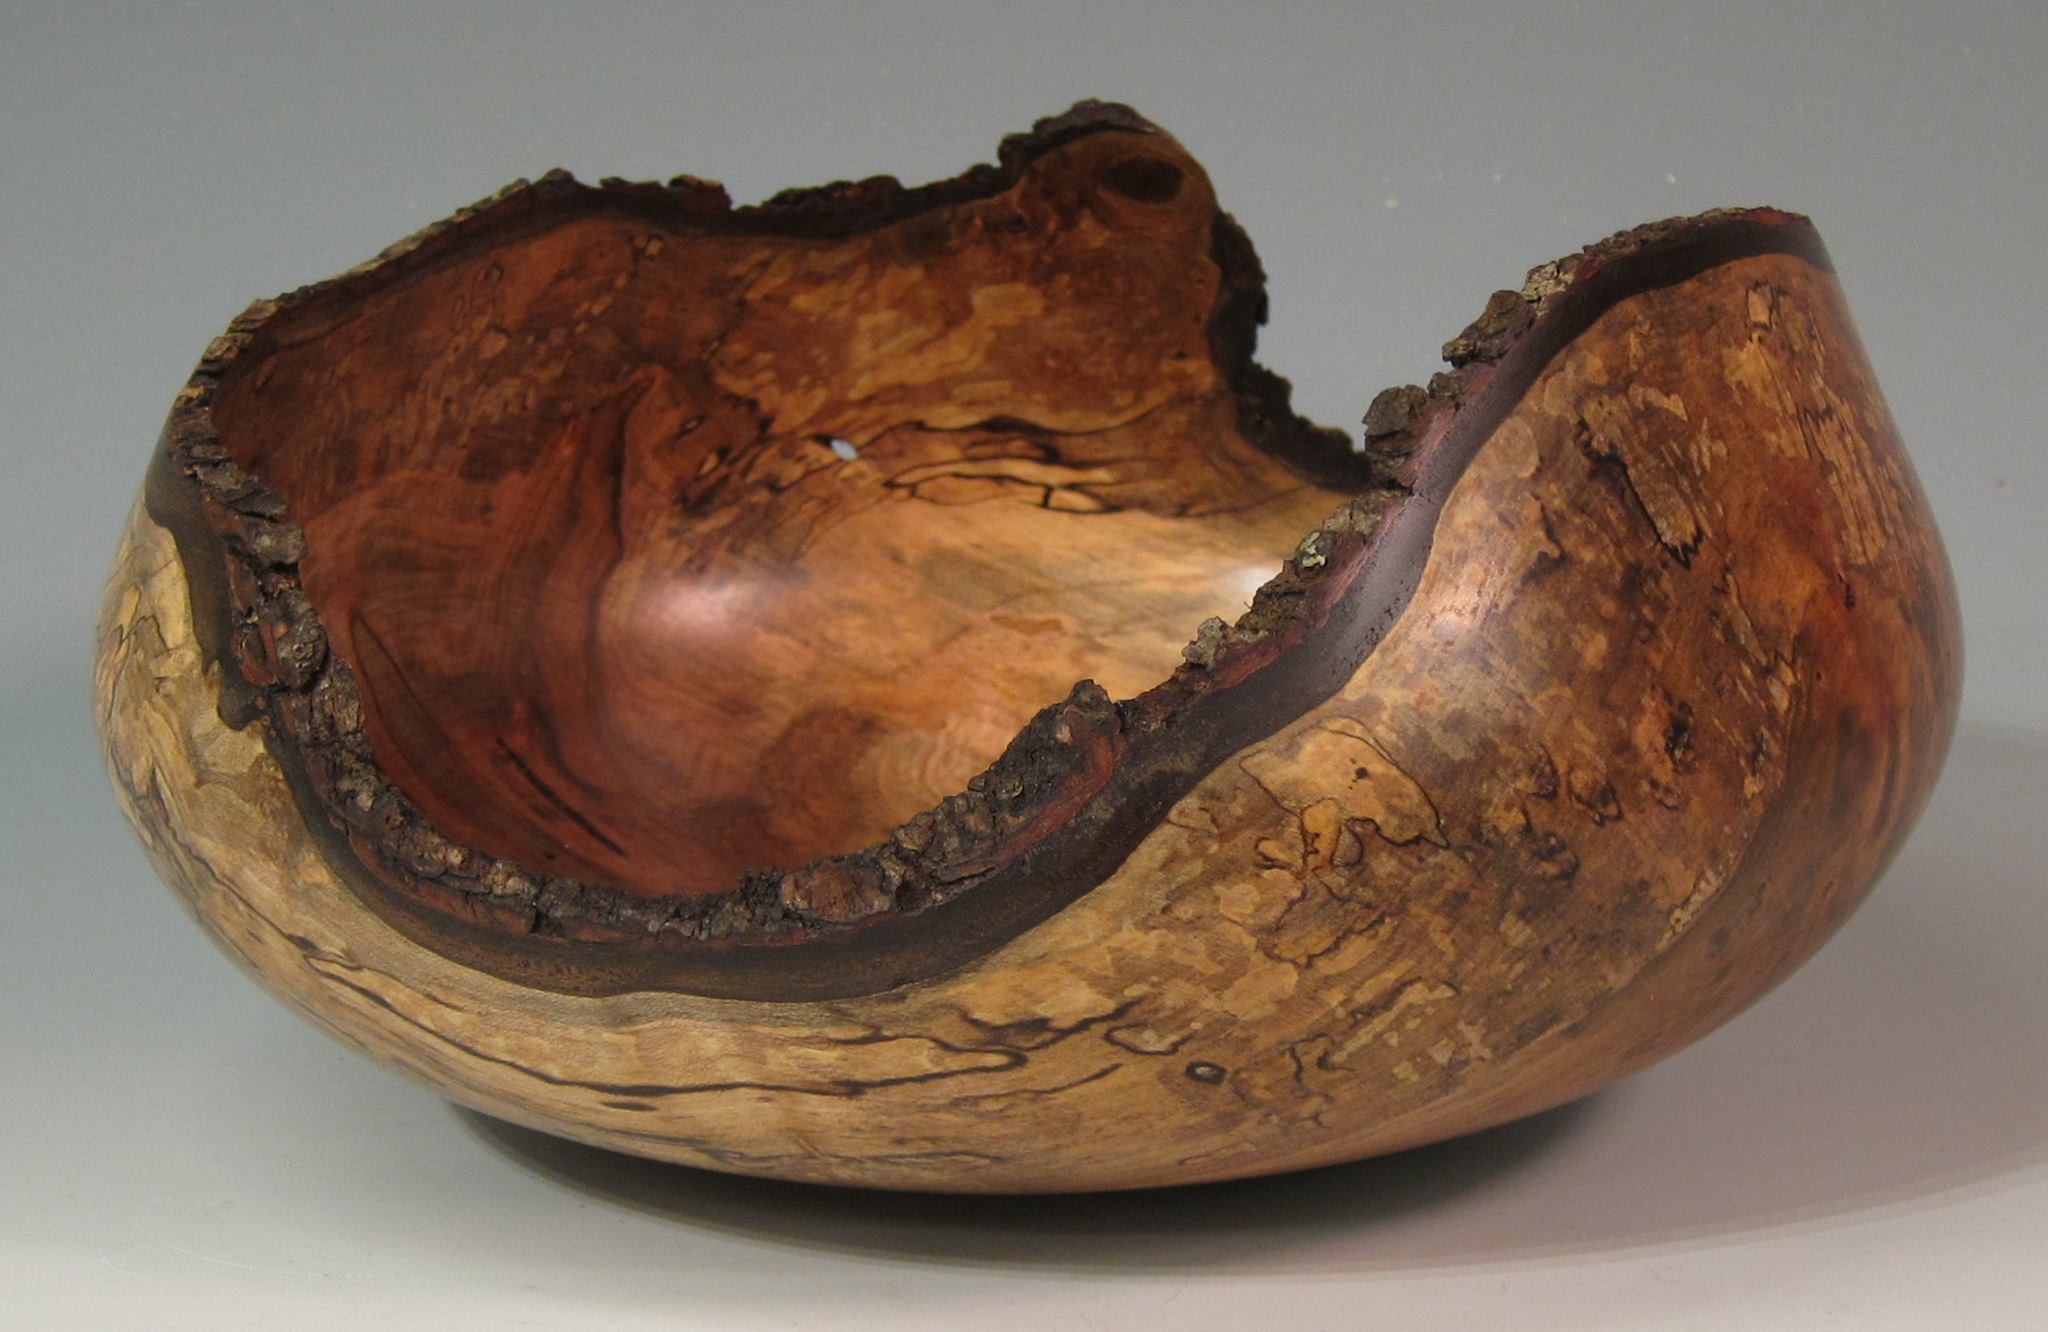 Natural Edge Ambrosia Maple Bowl 12 x 5 - Wood from Duke Forest